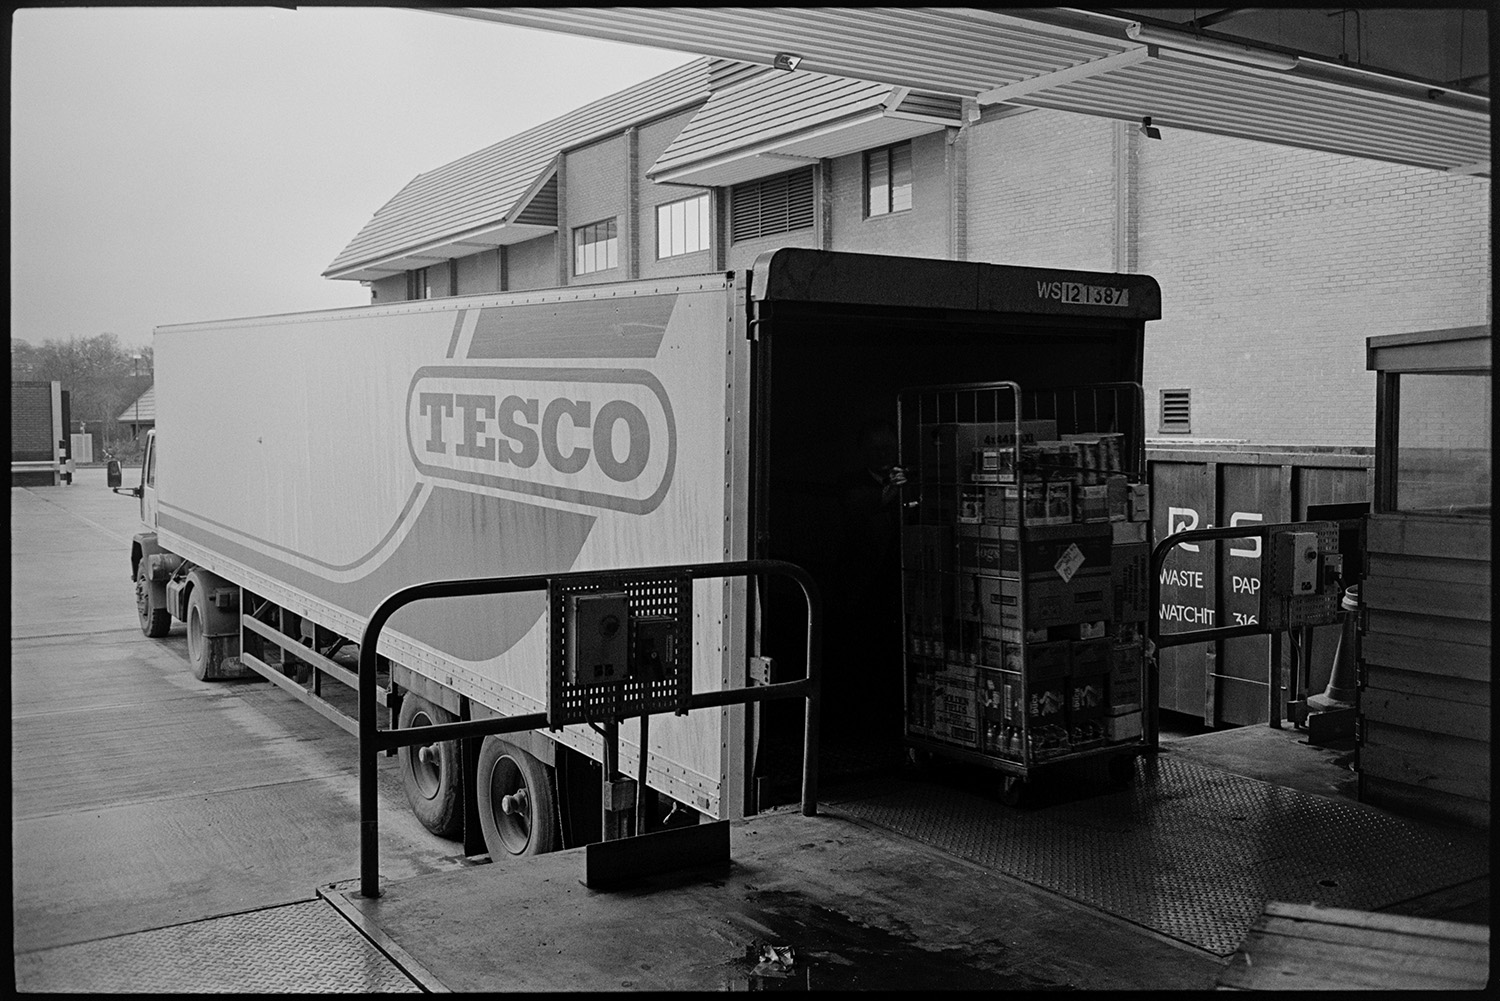 Interior of supermarket with people shopping, delivery lorry being unloaded. 
[Goods being unloaded from a lorry at the Tesco supermarket in Barnstaple.]